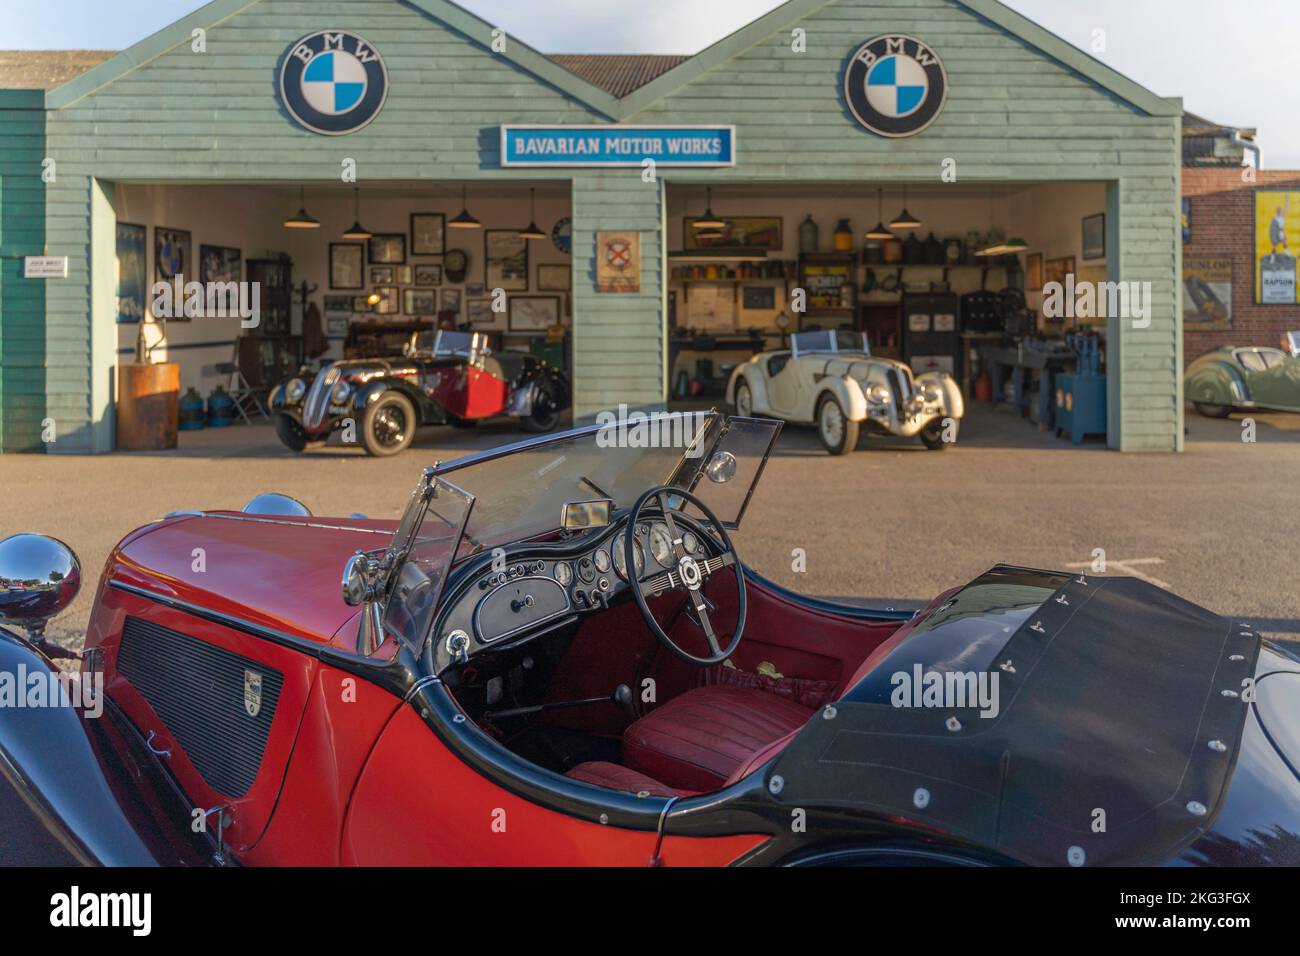 A mock up of an old Bavarian Motor Works (BMW) garage at the Goodwood Revival Stock Photo